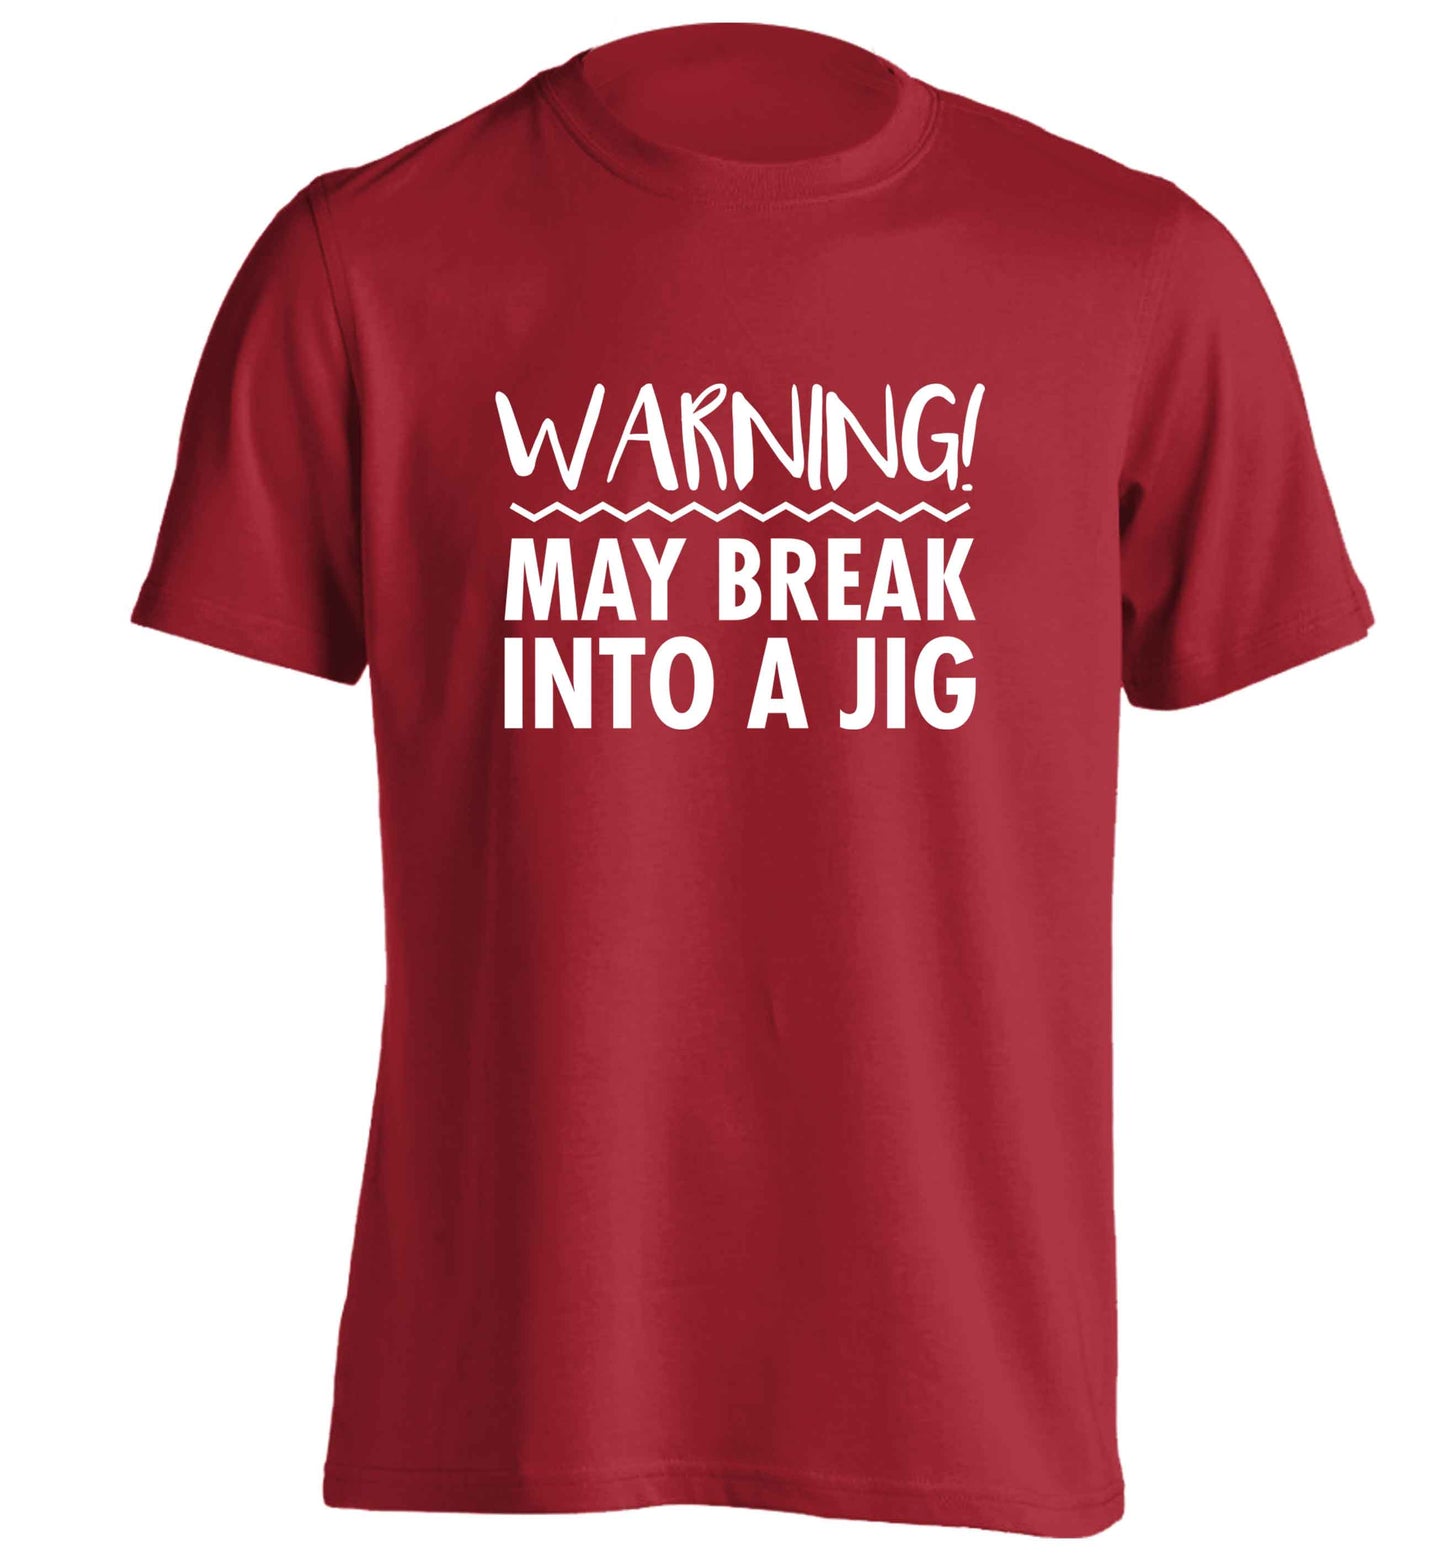 Warning may break into a jig adults unisex red Tshirt 2XL